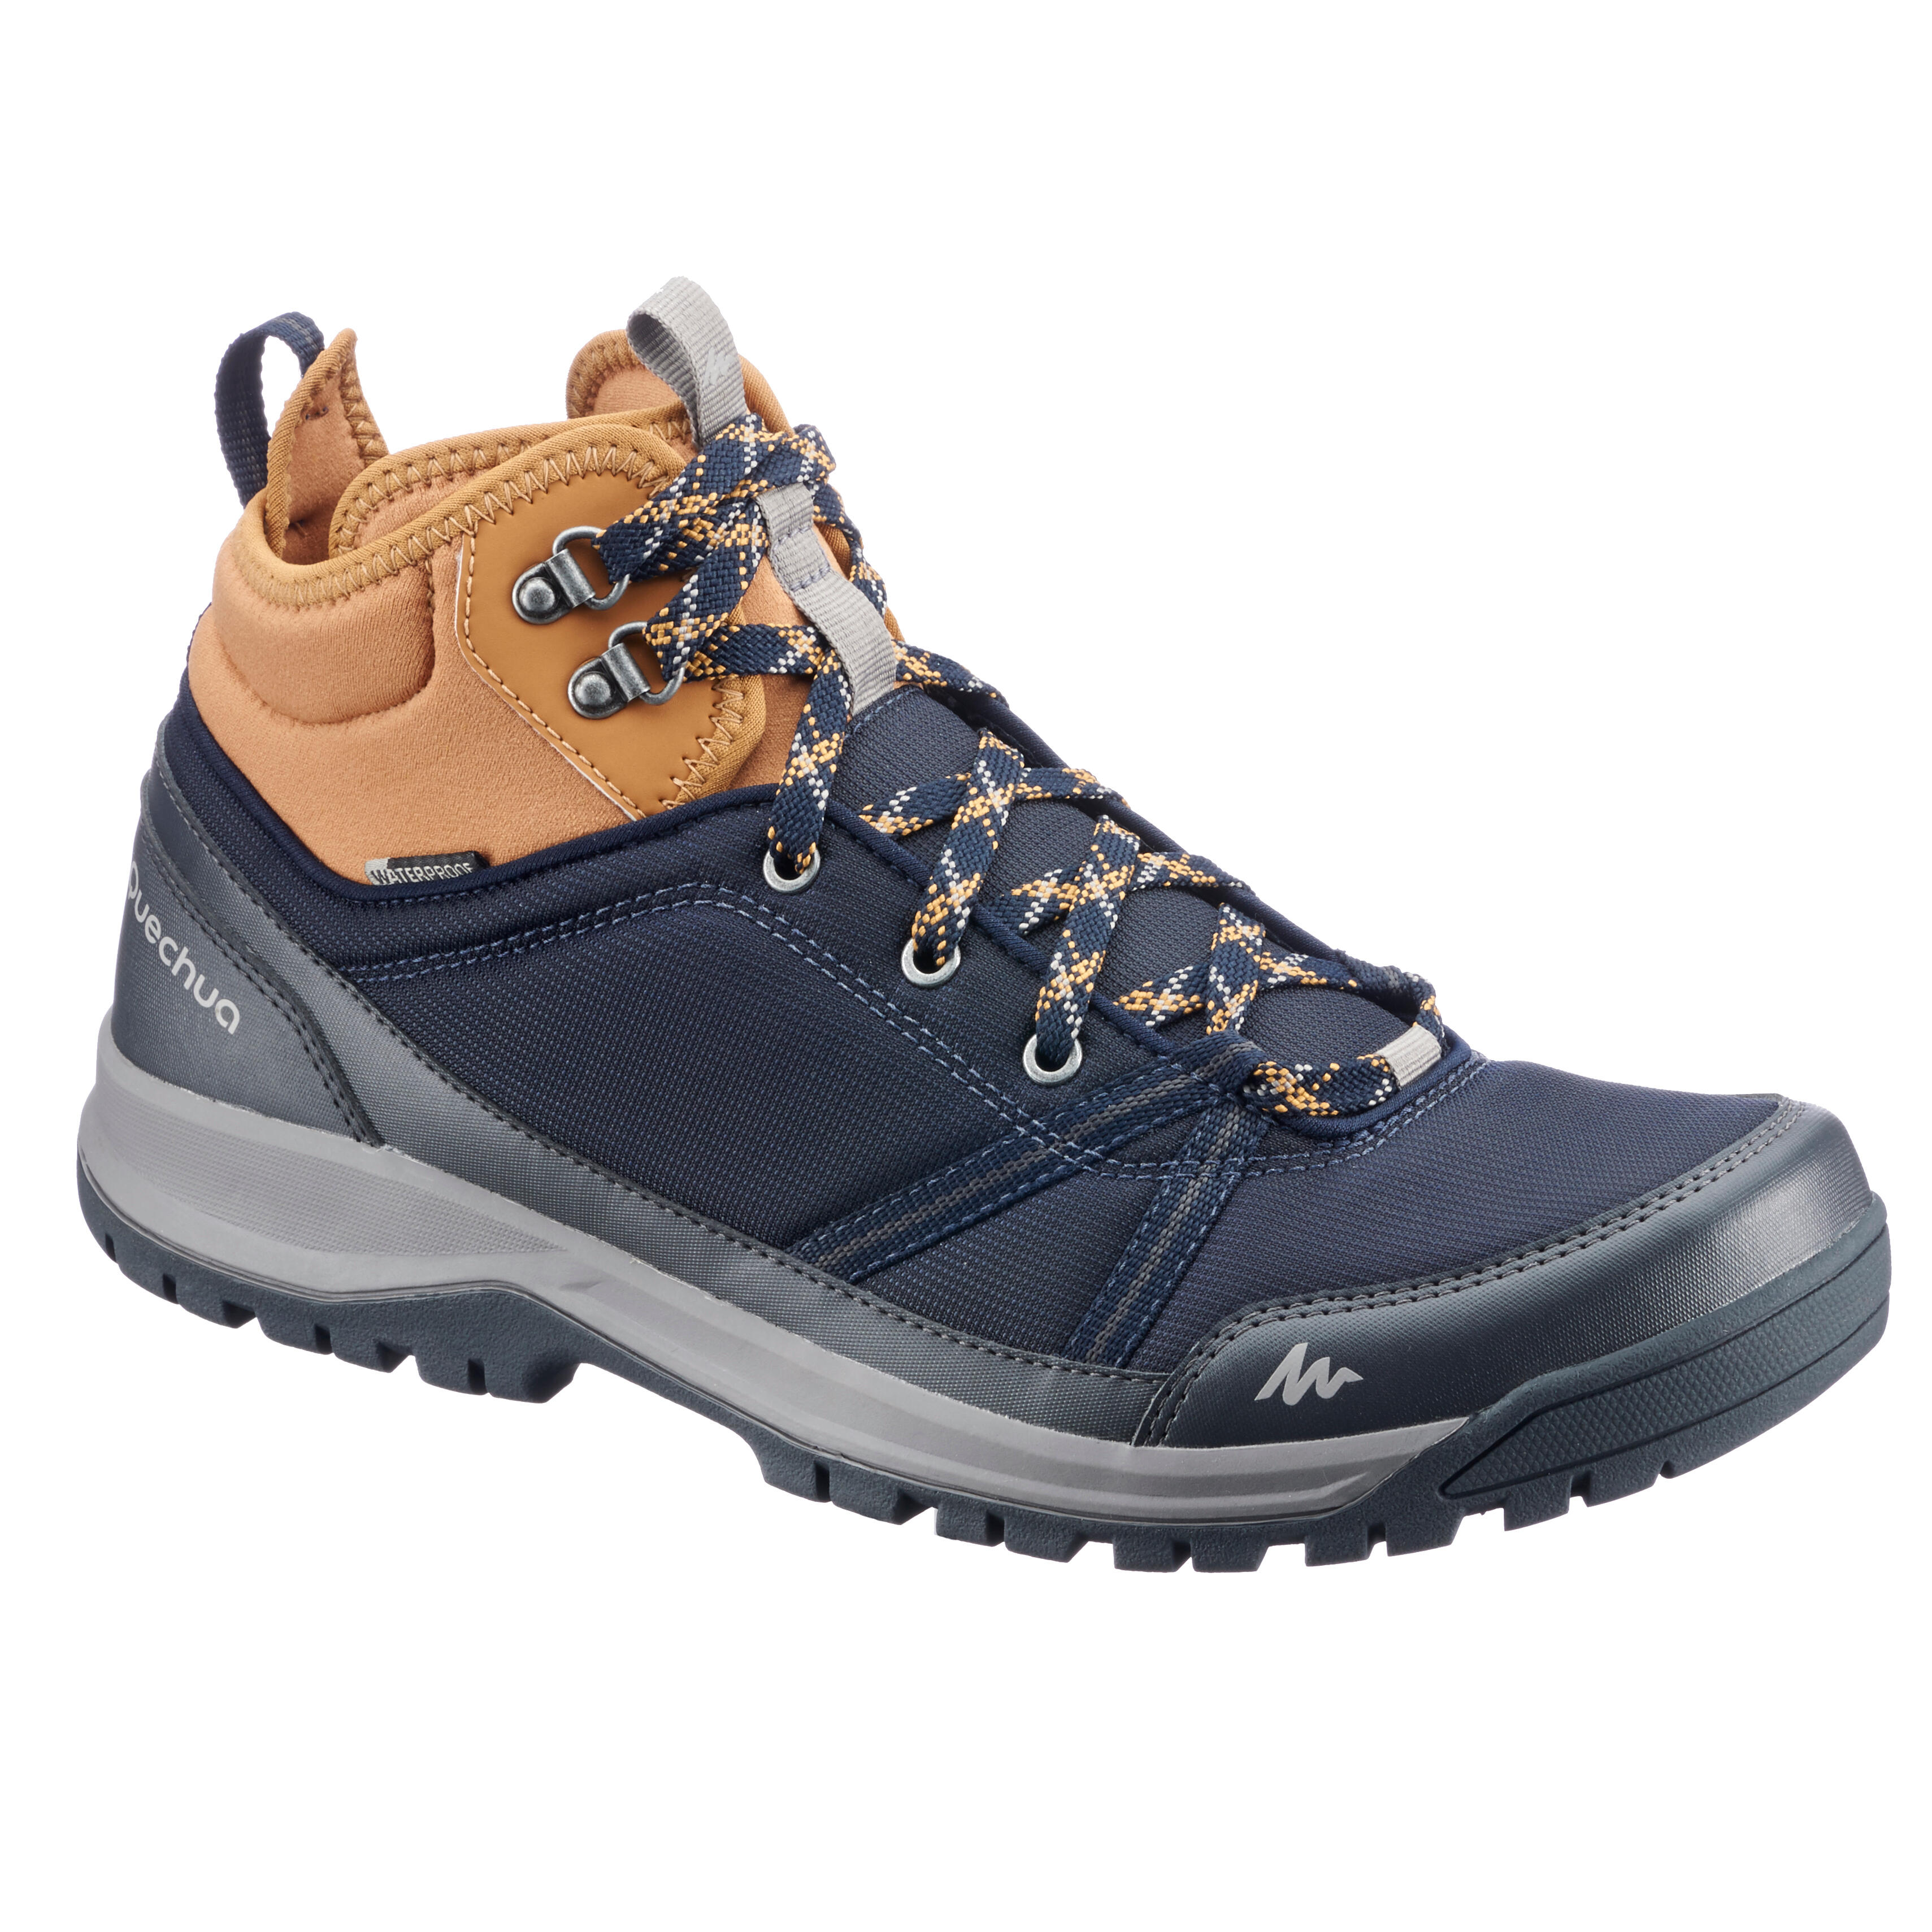 Hiking shoes | Hiking boots | Outdoor 